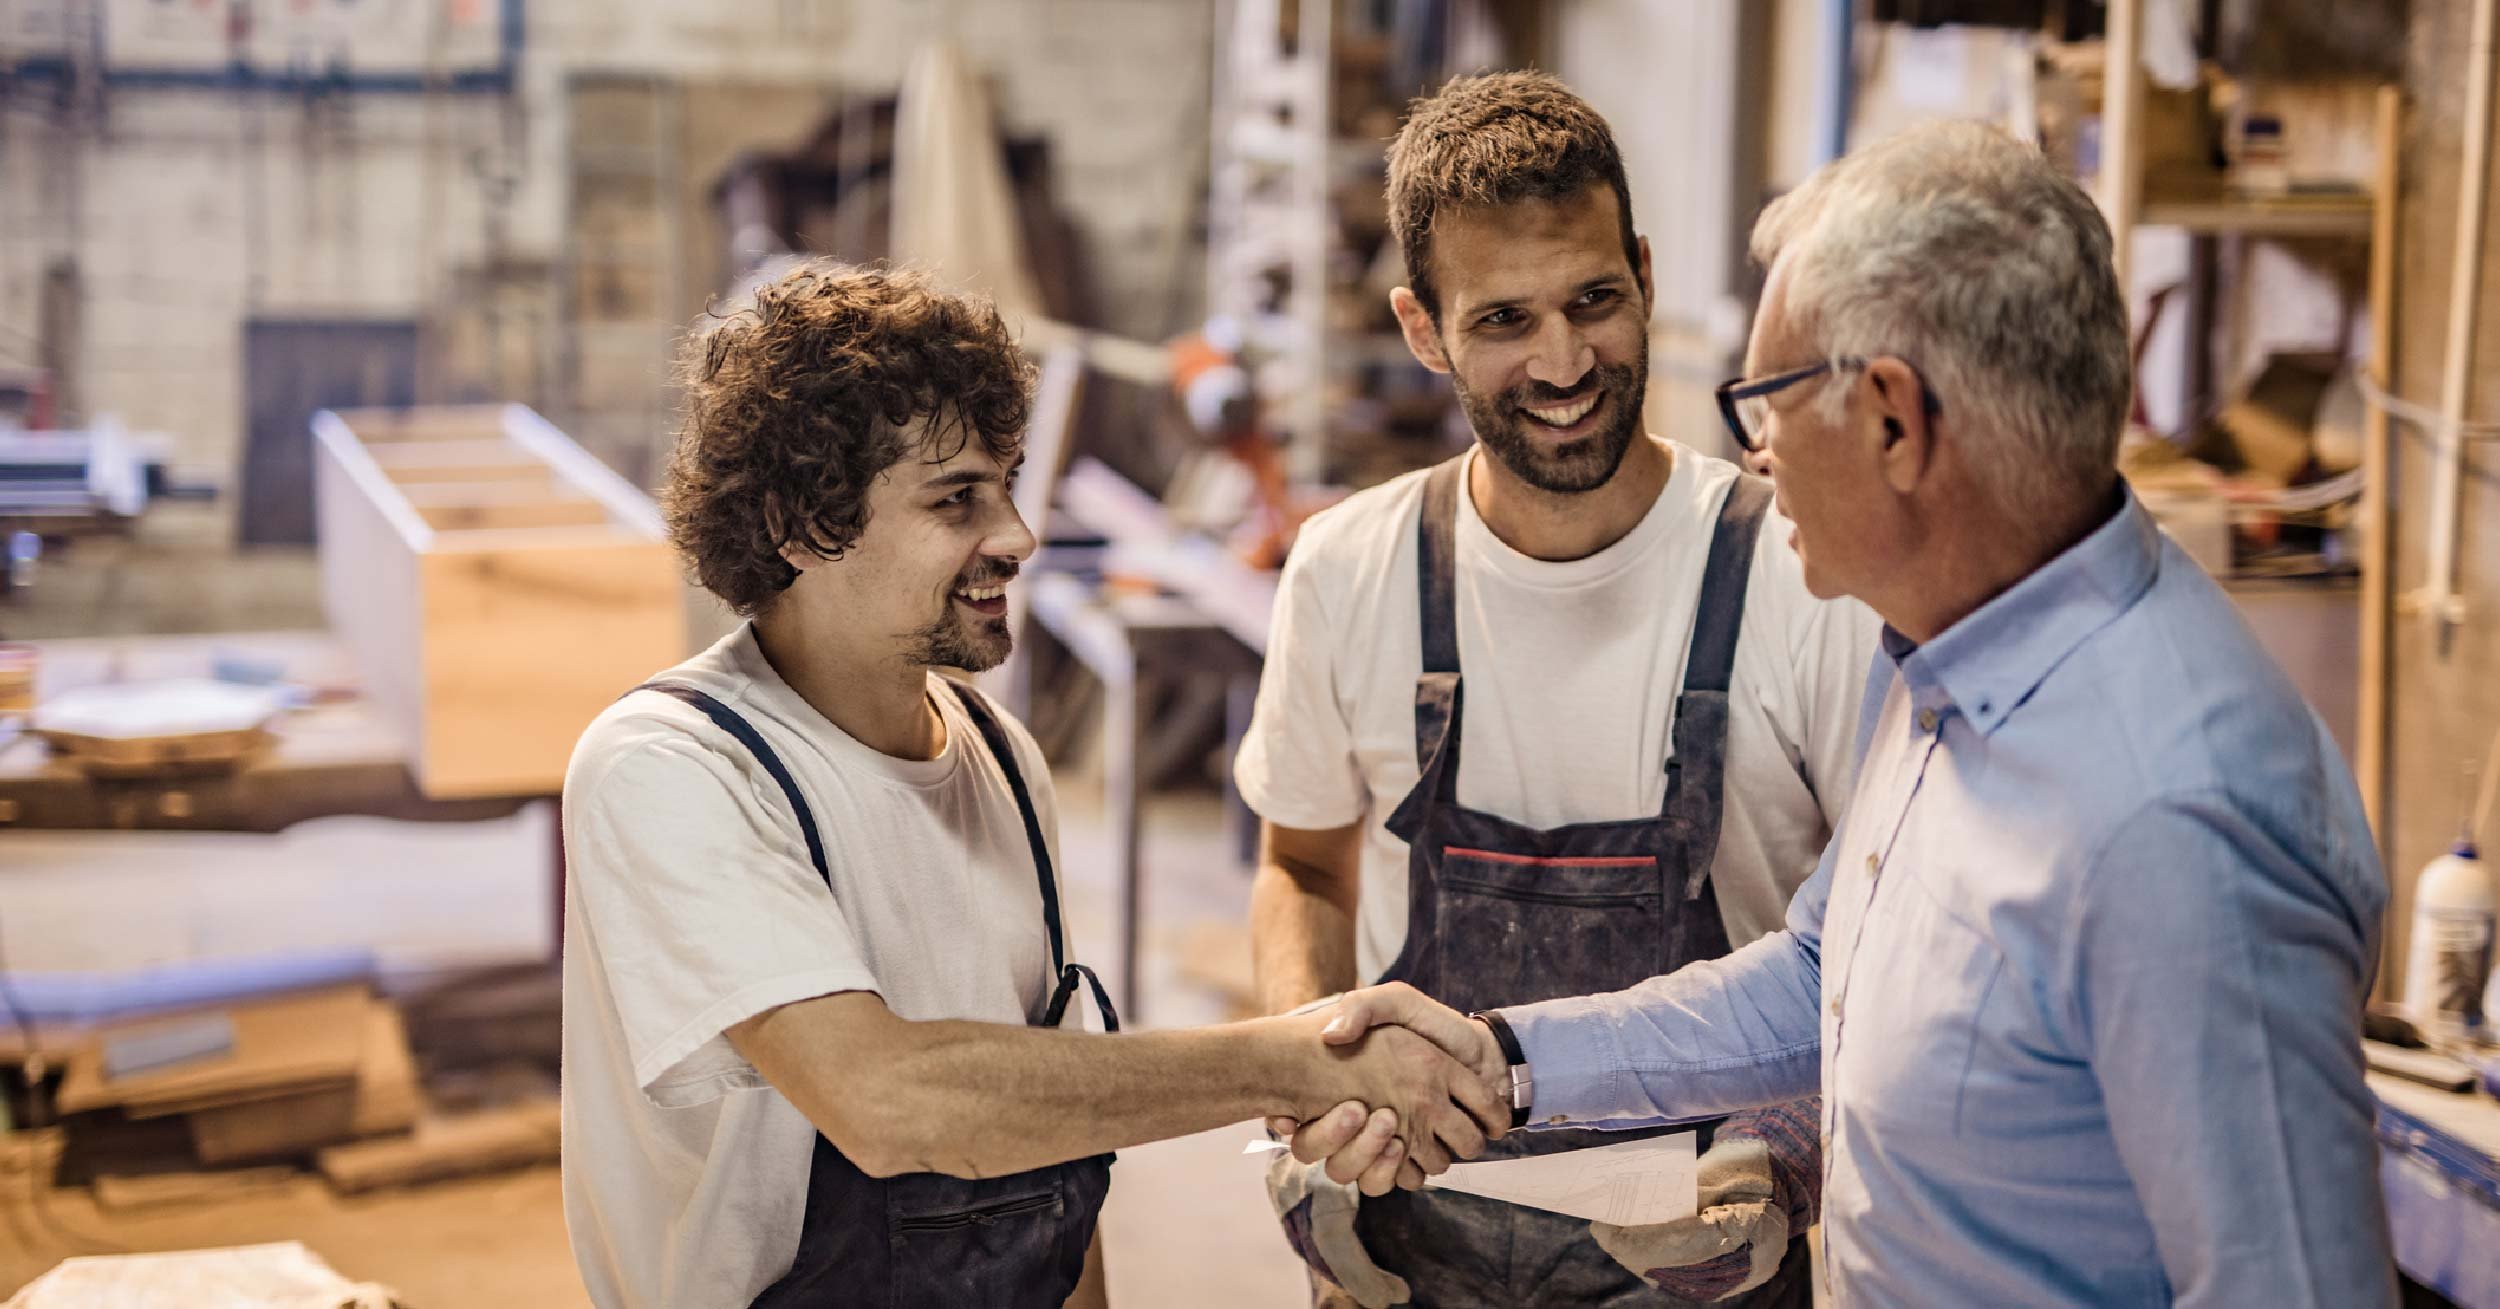 Small business owners shaking hands